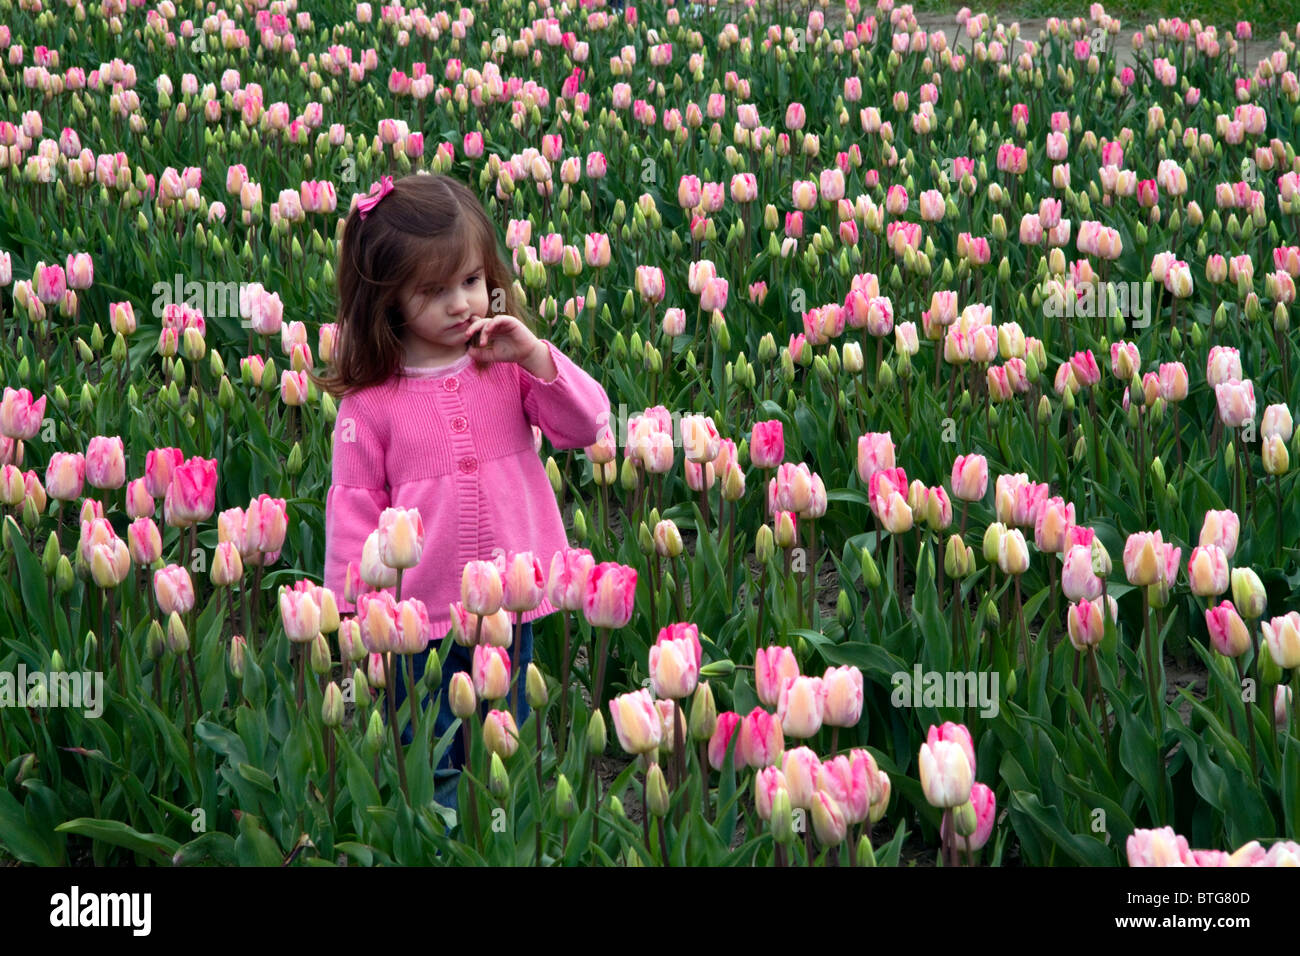 Young girl standing in a show garden of spring-flowering tulip bulbs in Skagit Valley, Washington, USA. Stock Photo